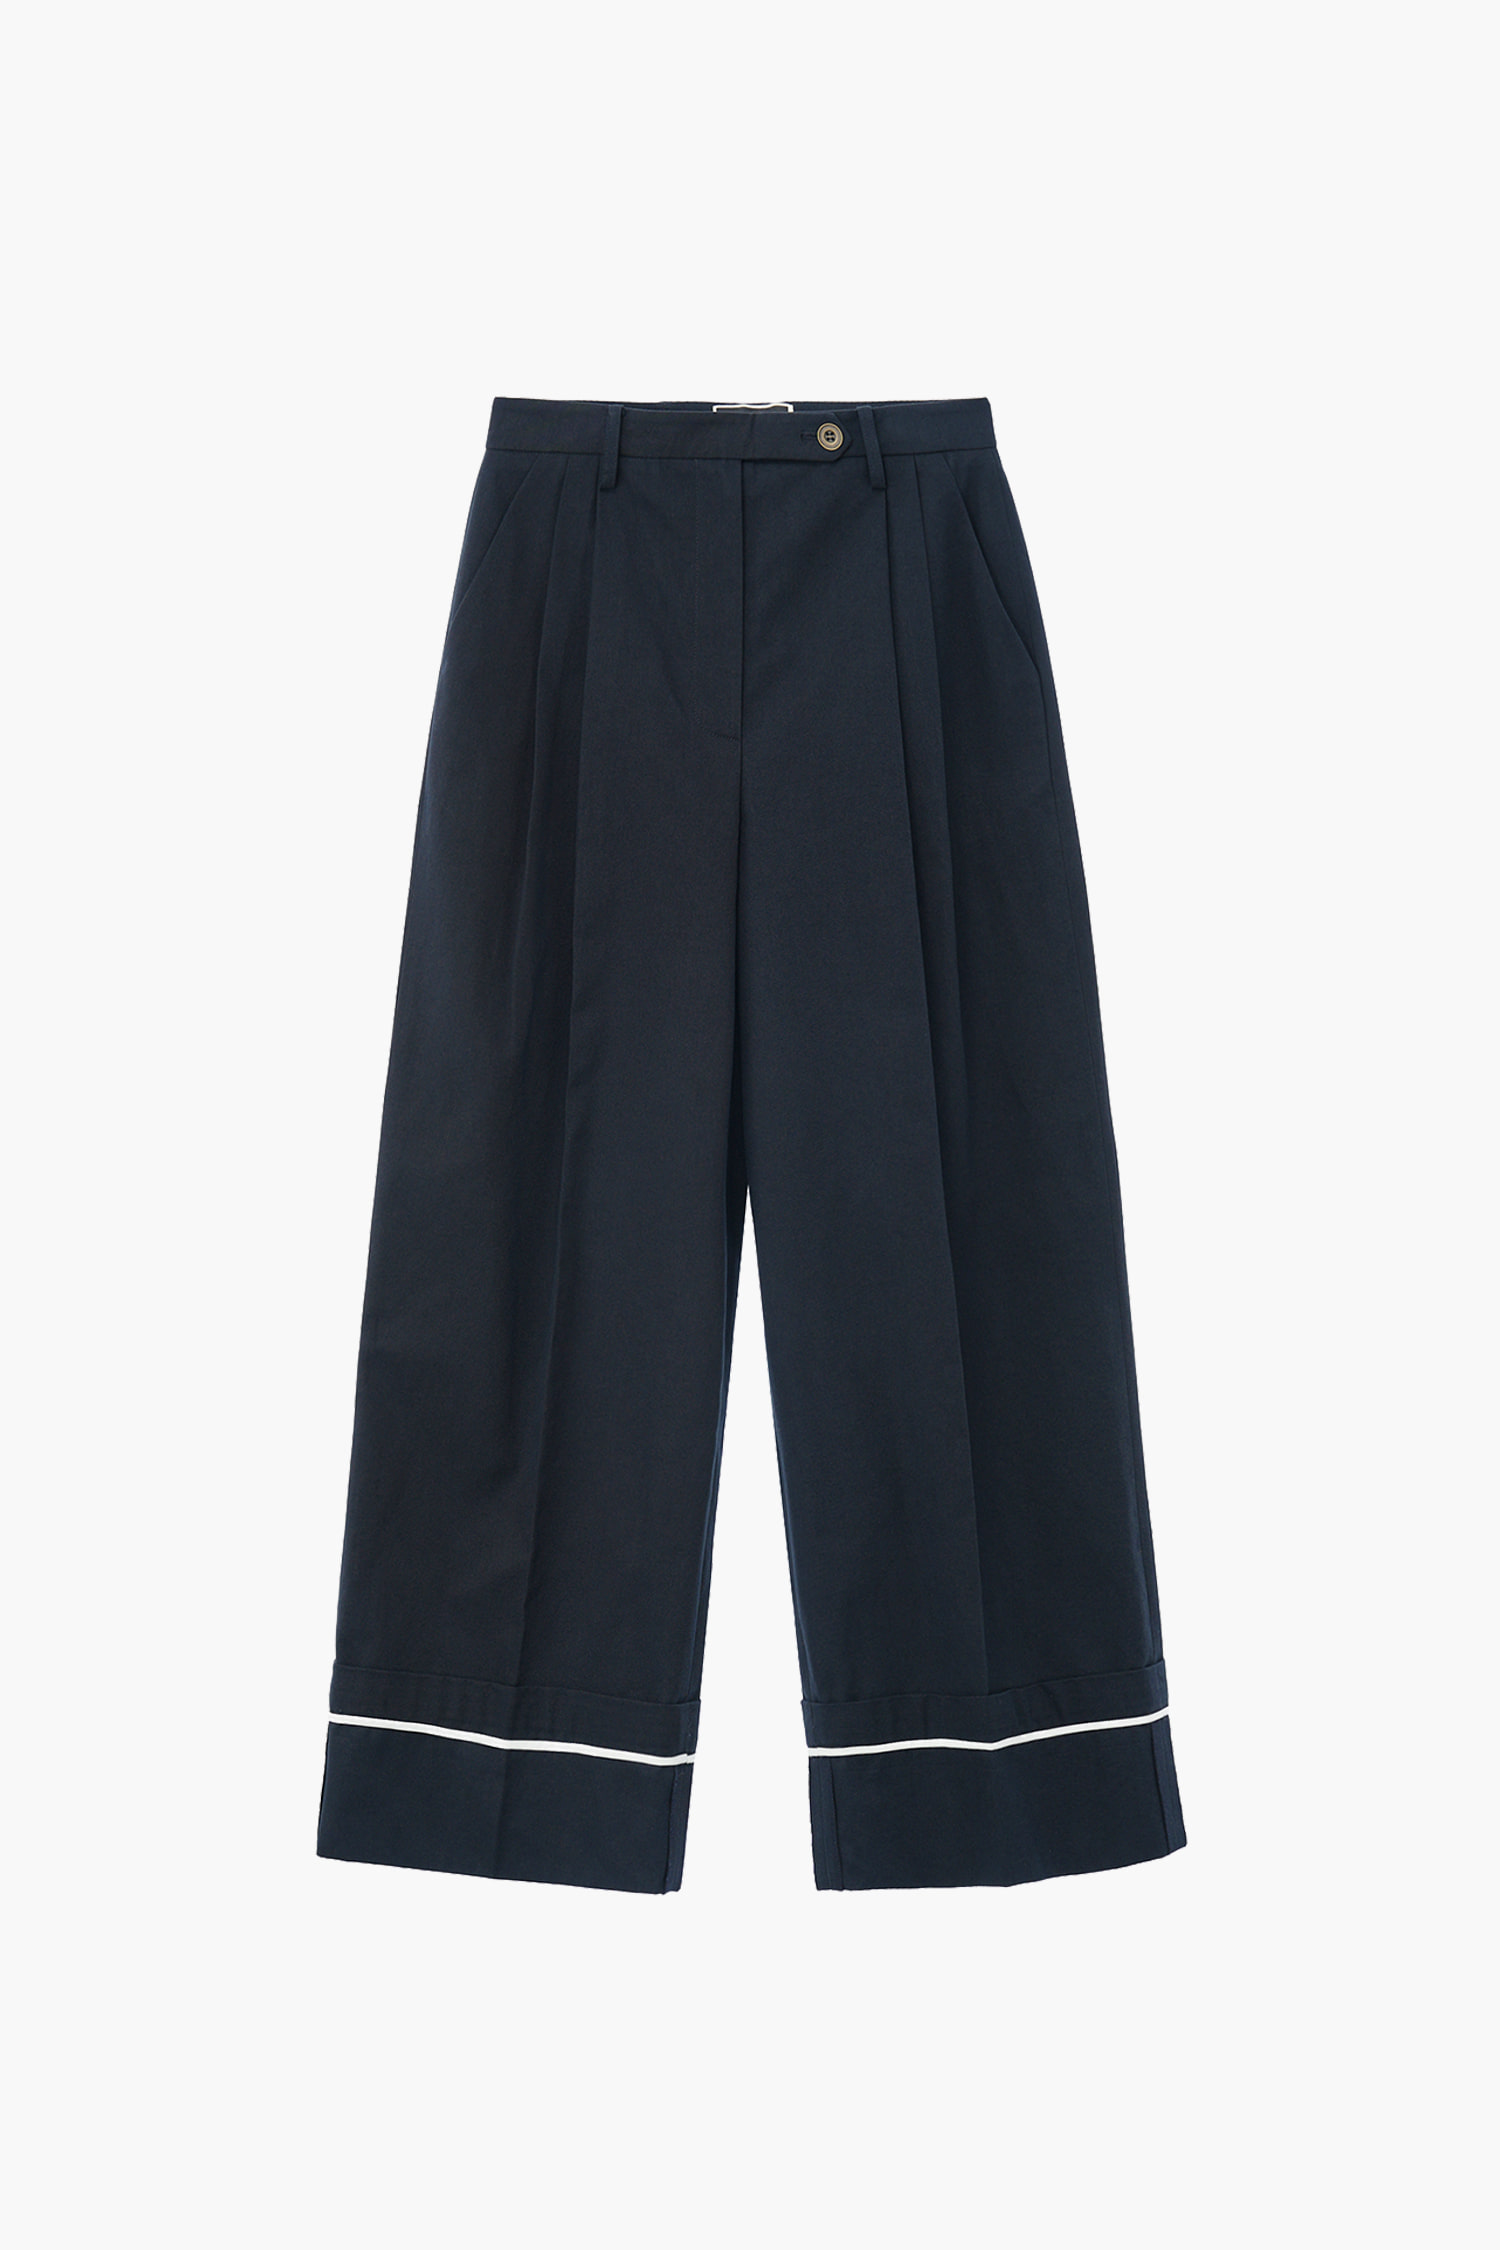 ROLL-UP WIDE PANTS - NAVY